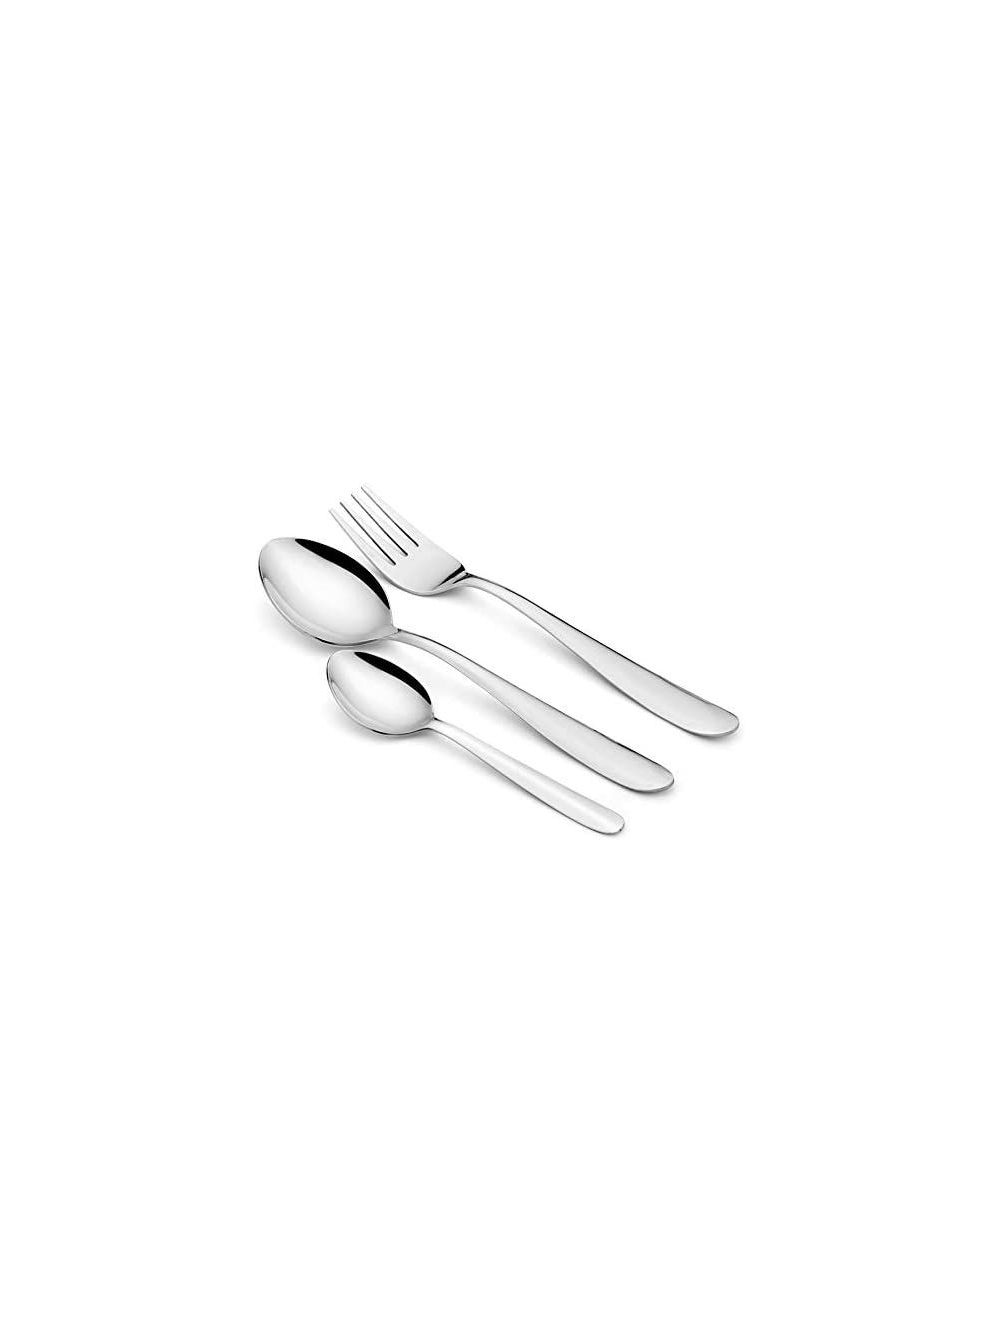 Classic Essentials 20 Pieces Stainless Steel Cutlery set-CESV47